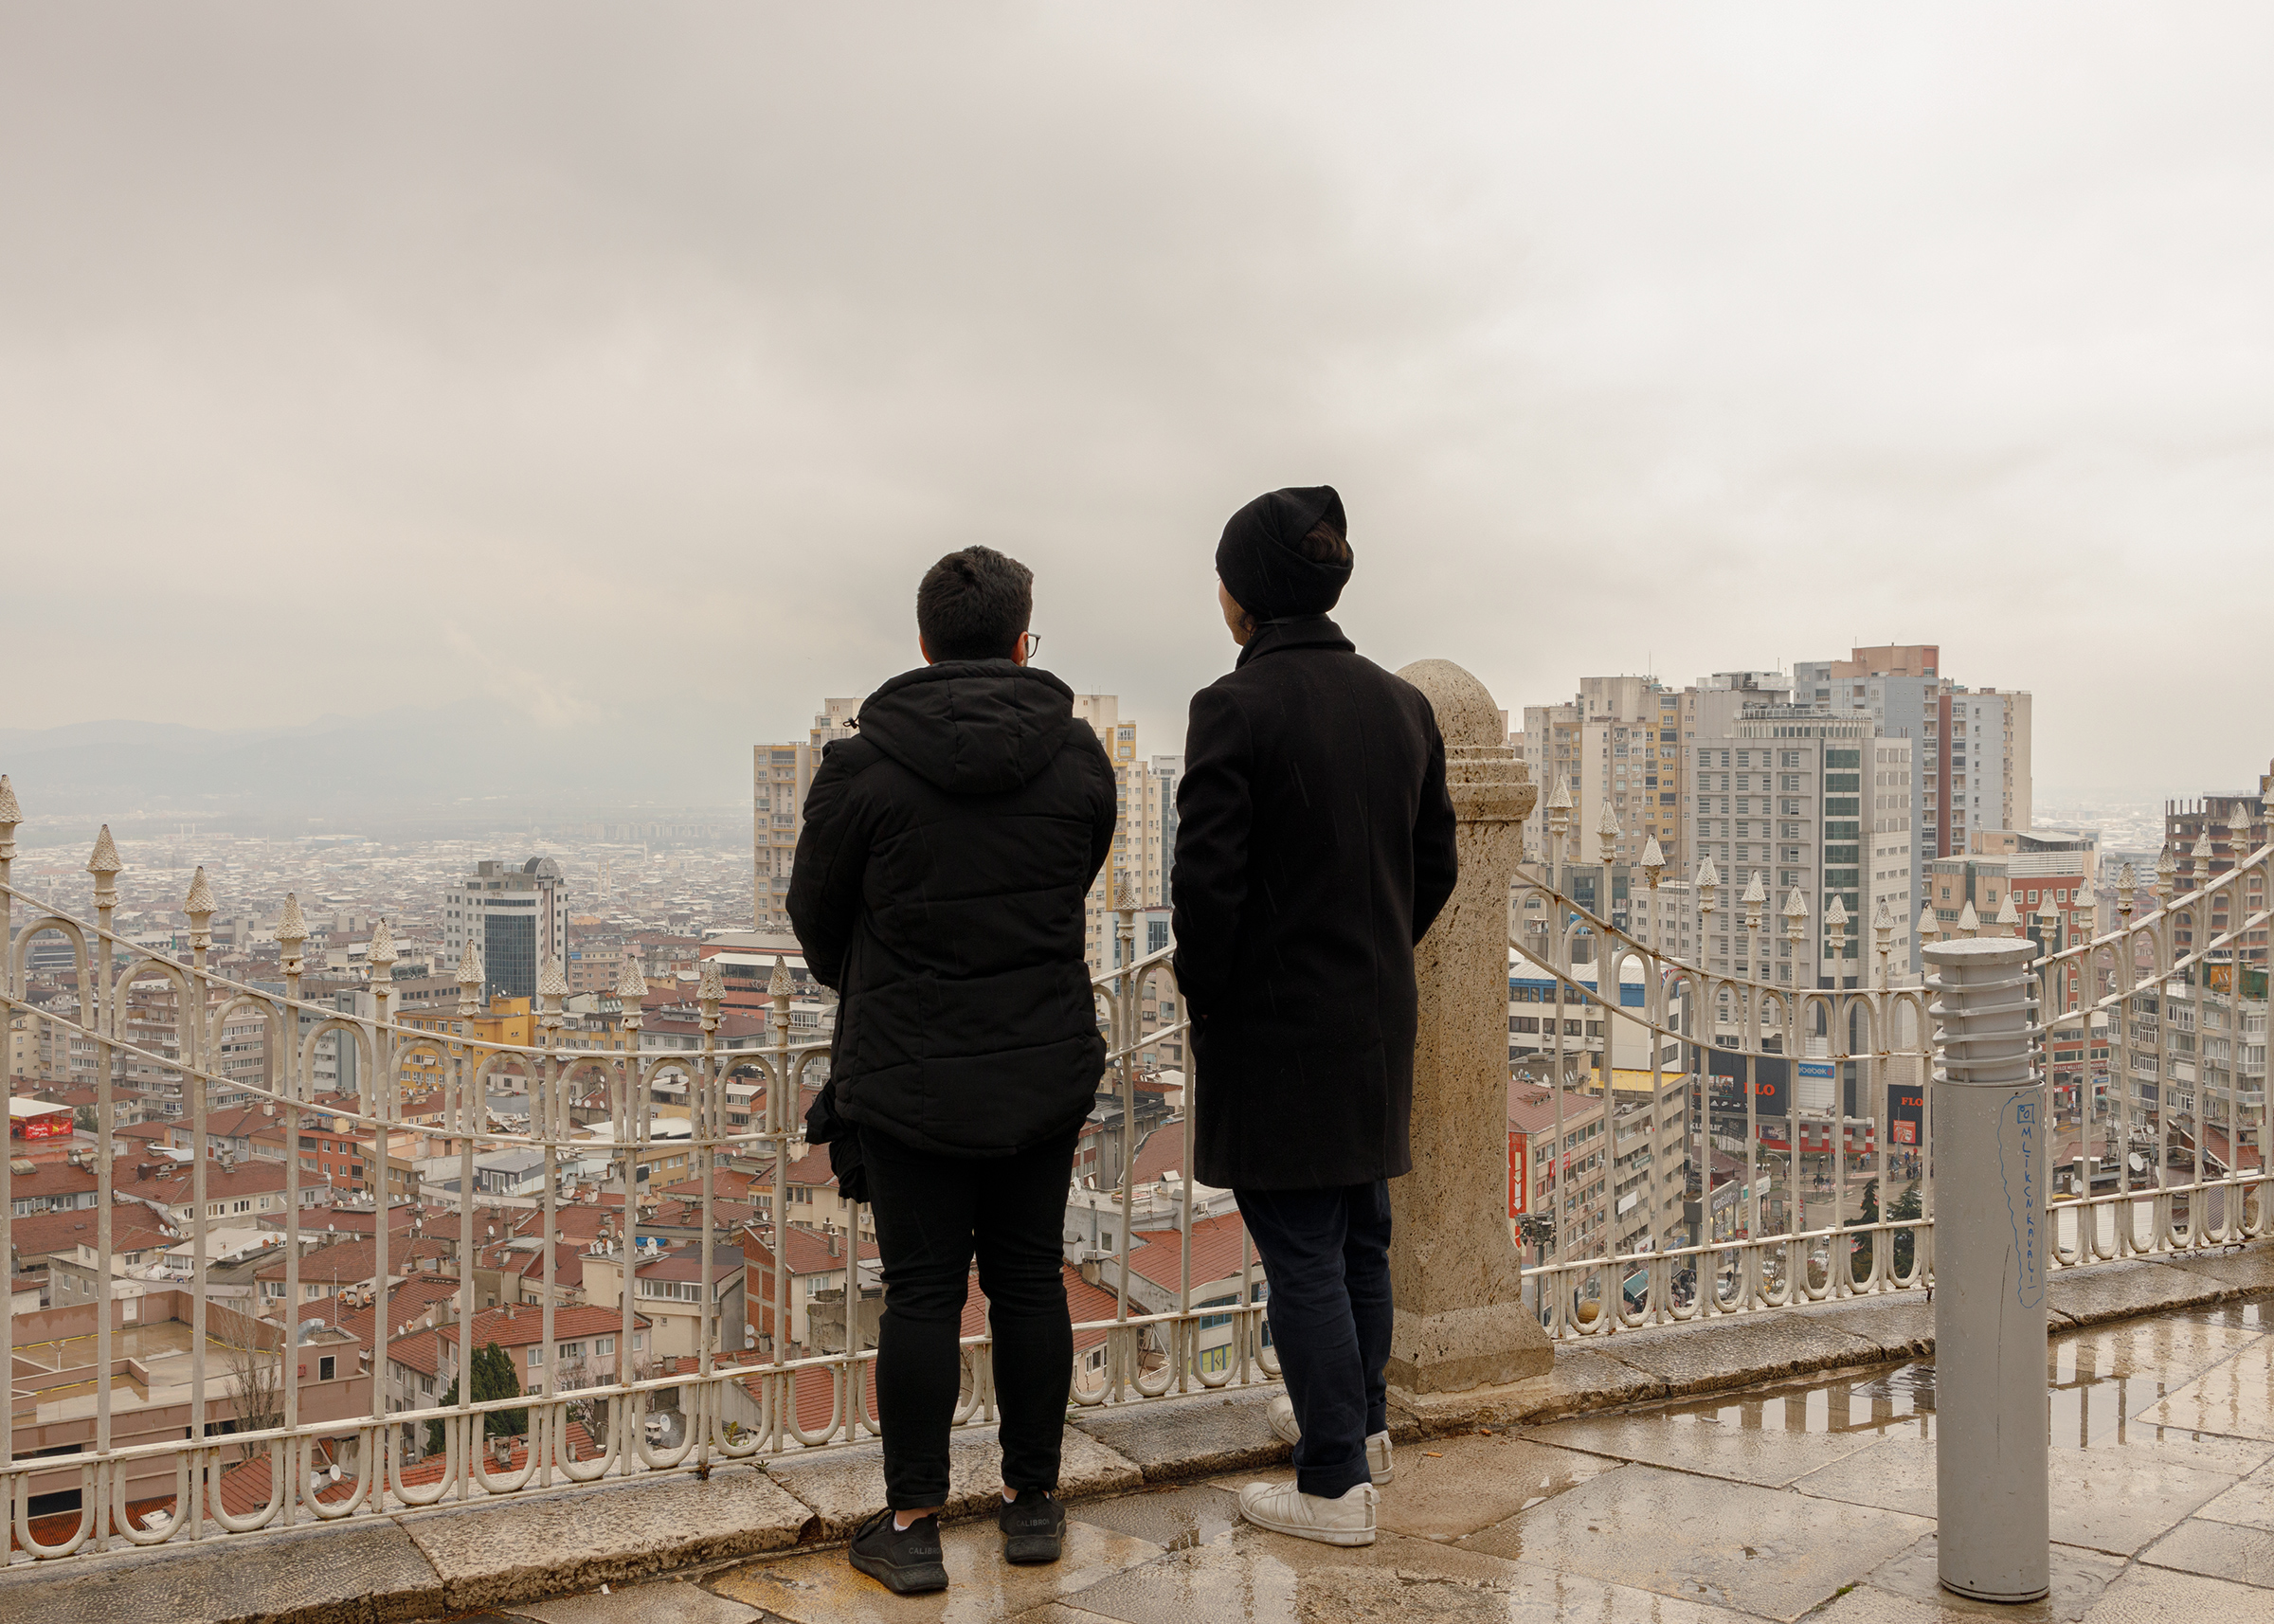 Mehdi*, 23, and Samir*, 24, originally from Aleppo and based in Gaziantep, Turkey, look out at Bursa, a city close to Istanbul where the two brothers found refuge after the Turkish government granted 60-days travel permission to Syrians under temporary protection, in April. (Their names have been changed.) The $500 provided by the government to all affected families also helped Mehdi and Samir to temporarily move away from their adopted city, while the aftershocks continued. (Carola Cappellari)